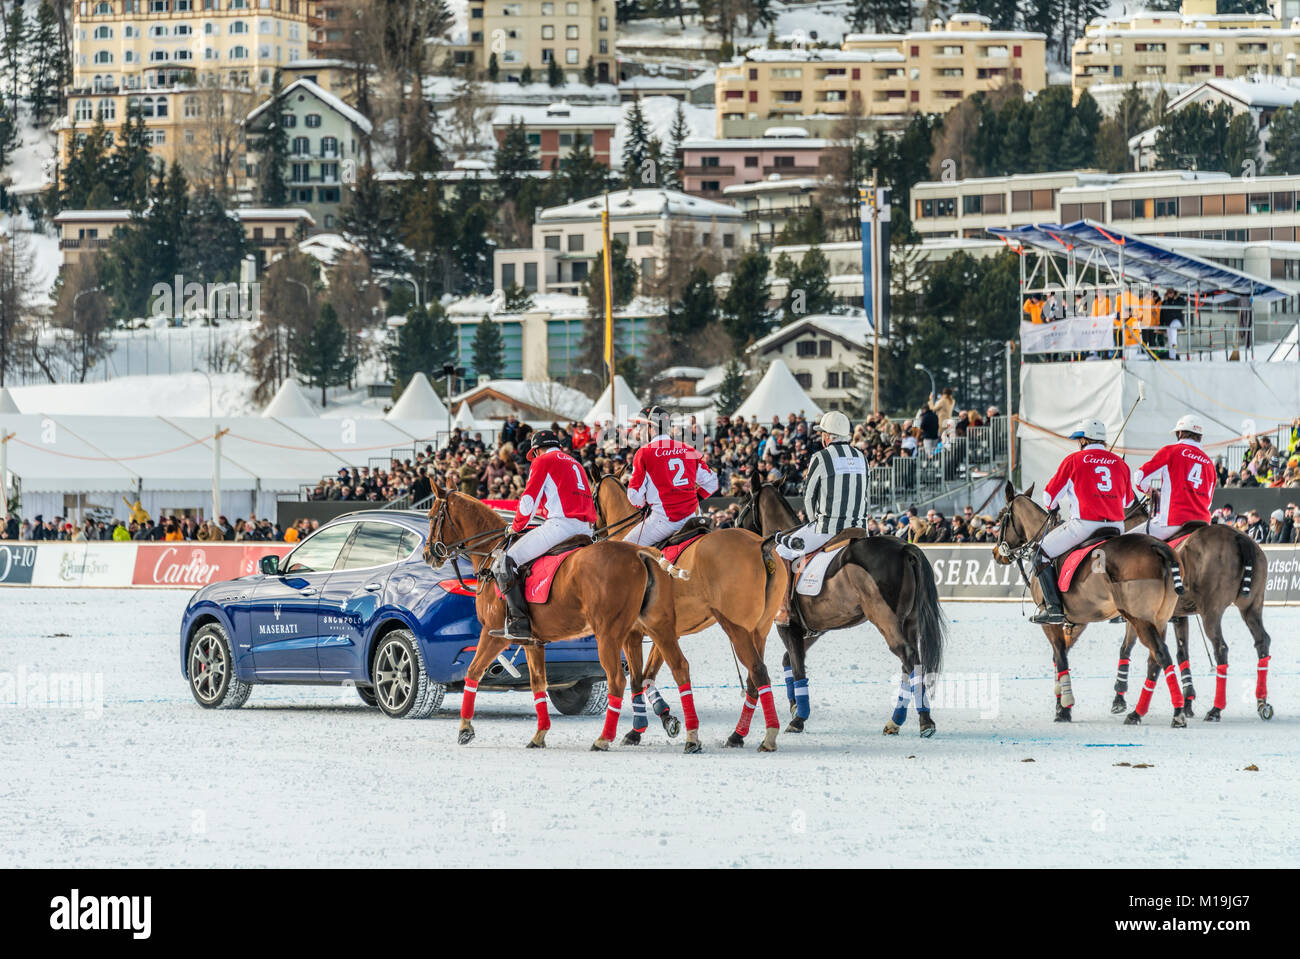 St.Moritz, Switzerland. 28th Jan, 2018. Members of the 'Cartier' team behind a Maserati Sponsor car during the final of the Snow Polo World Cup 2018 game on January 28, 2018 in St Moritz, Switzerland Credit: travelbild/Alamy Live News Stock Photo